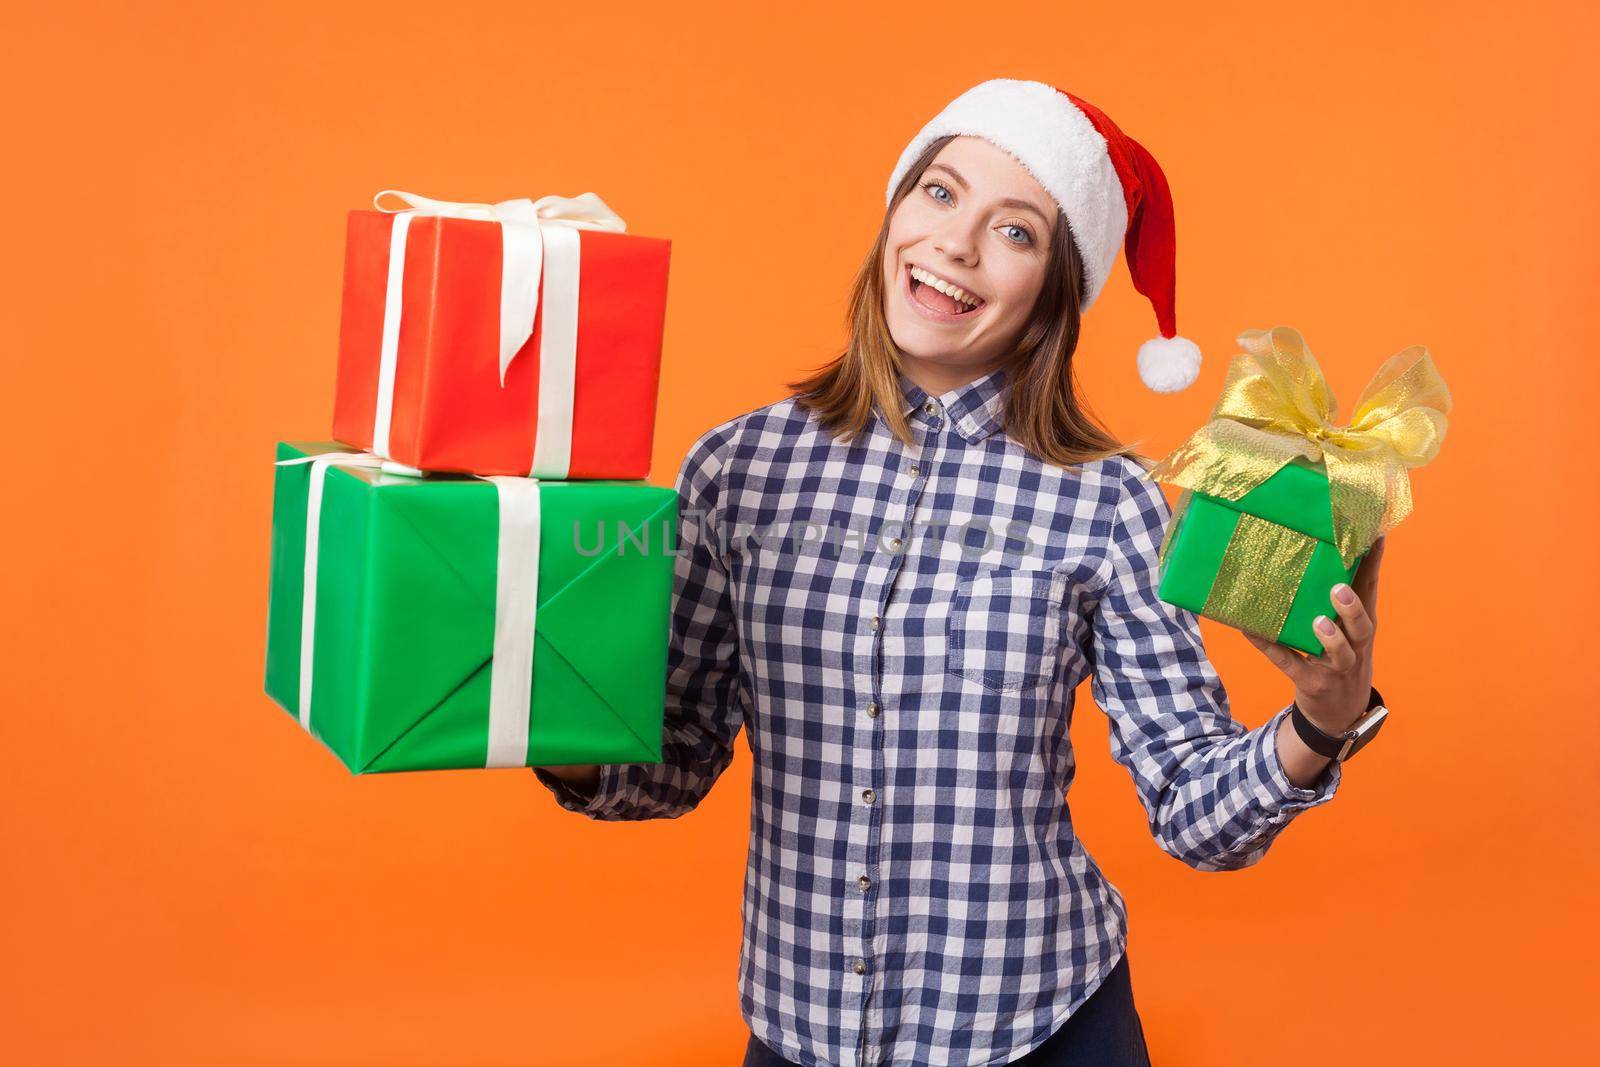 Portrait of joyous beautiful brunette woman in santa hat and checkered shirt standing, holding gift boxes and looking at camera with excitement. indoor studio shot isolated on orange background